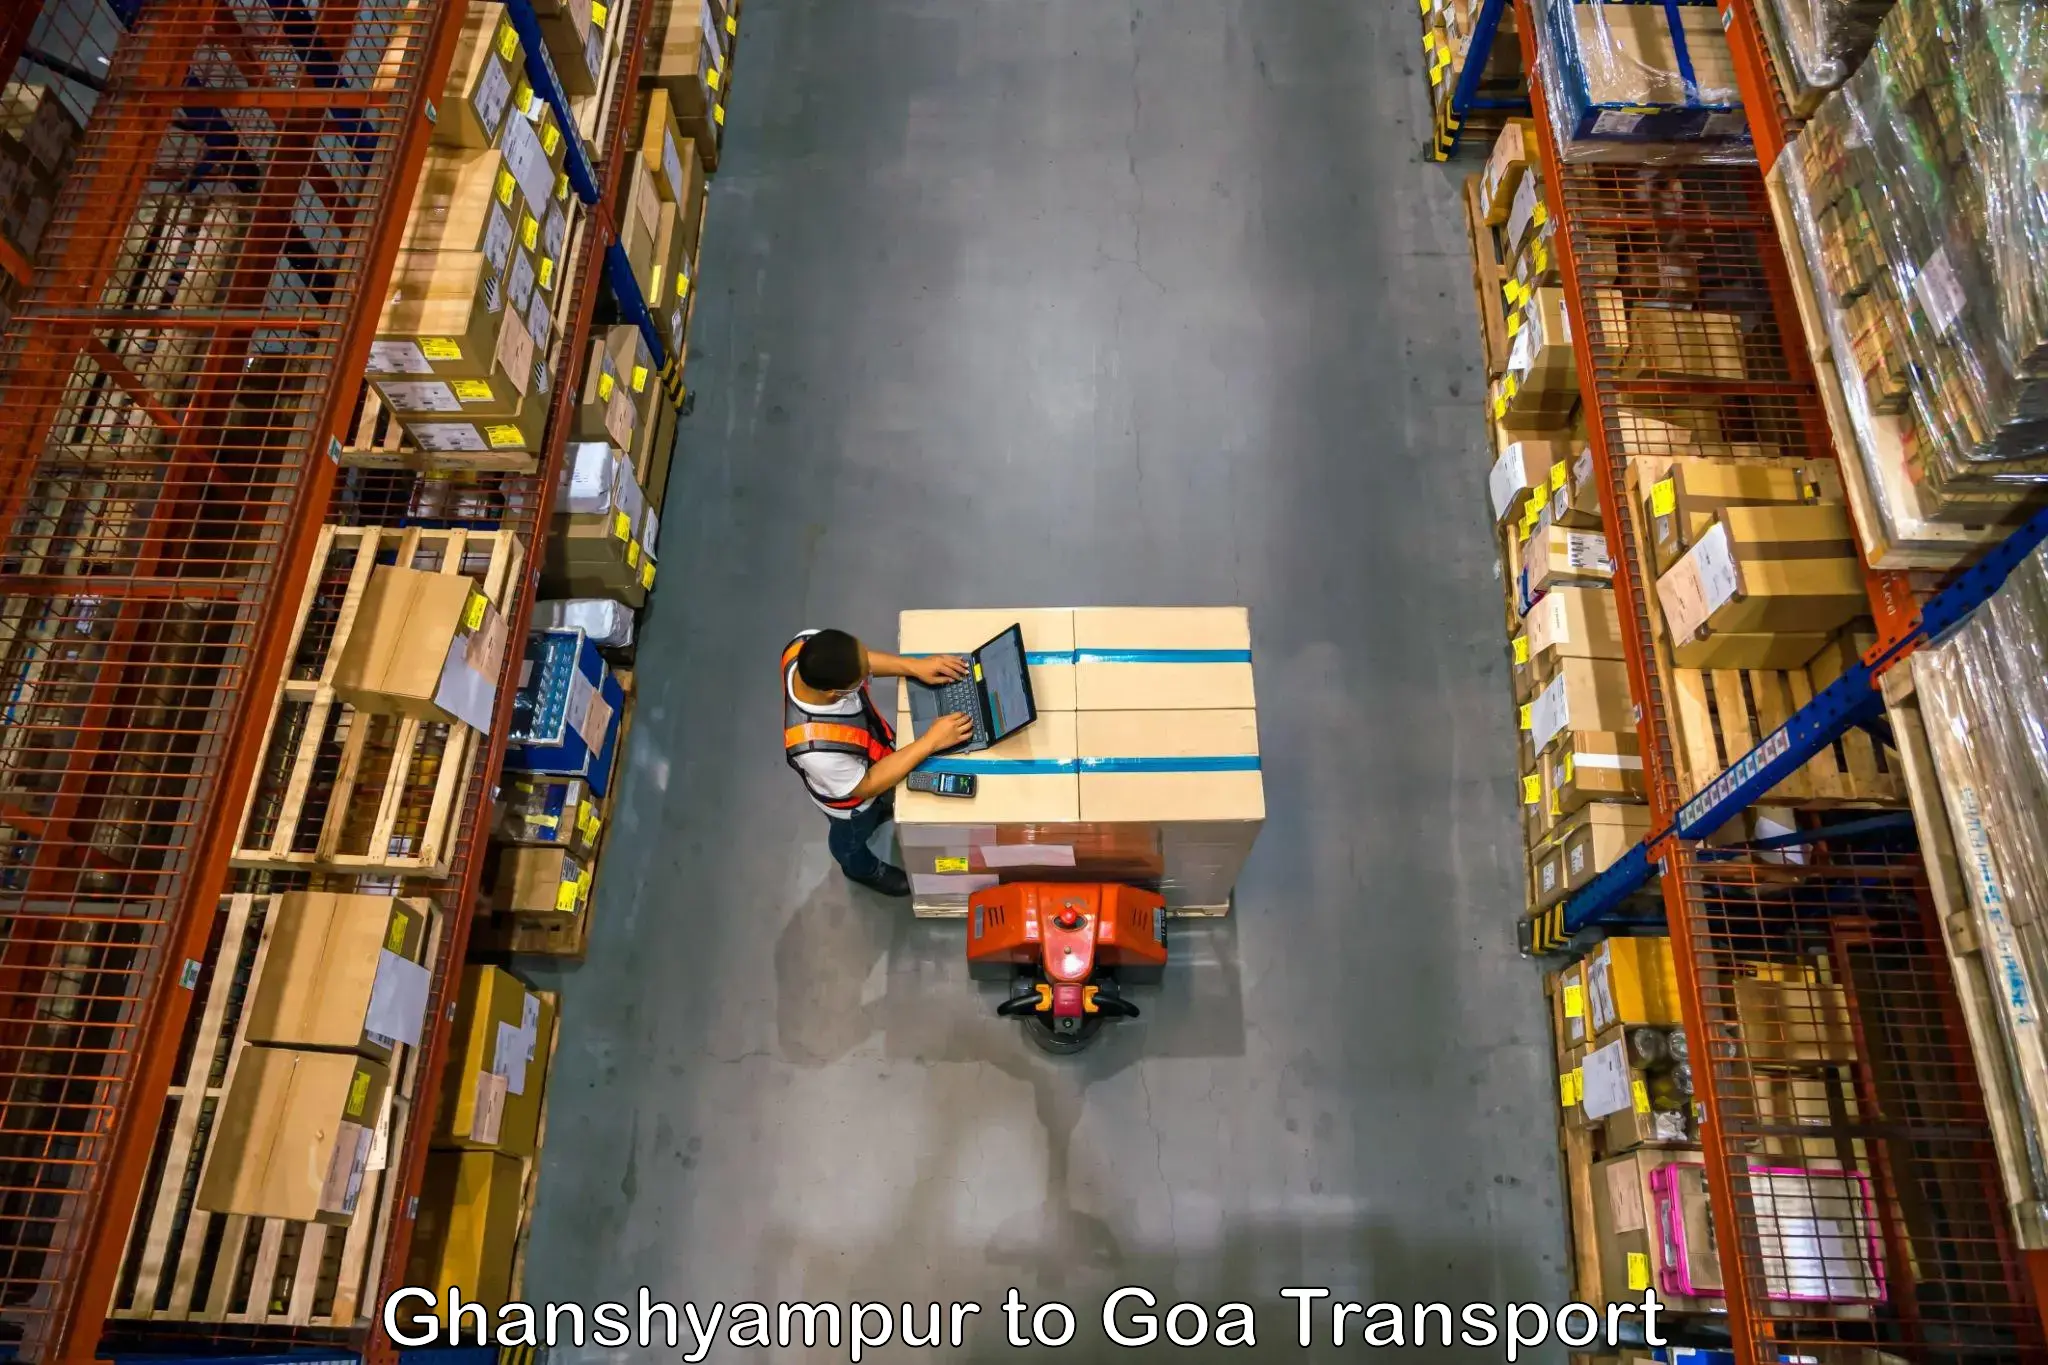 Container transport service Ghanshyampur to Panjim